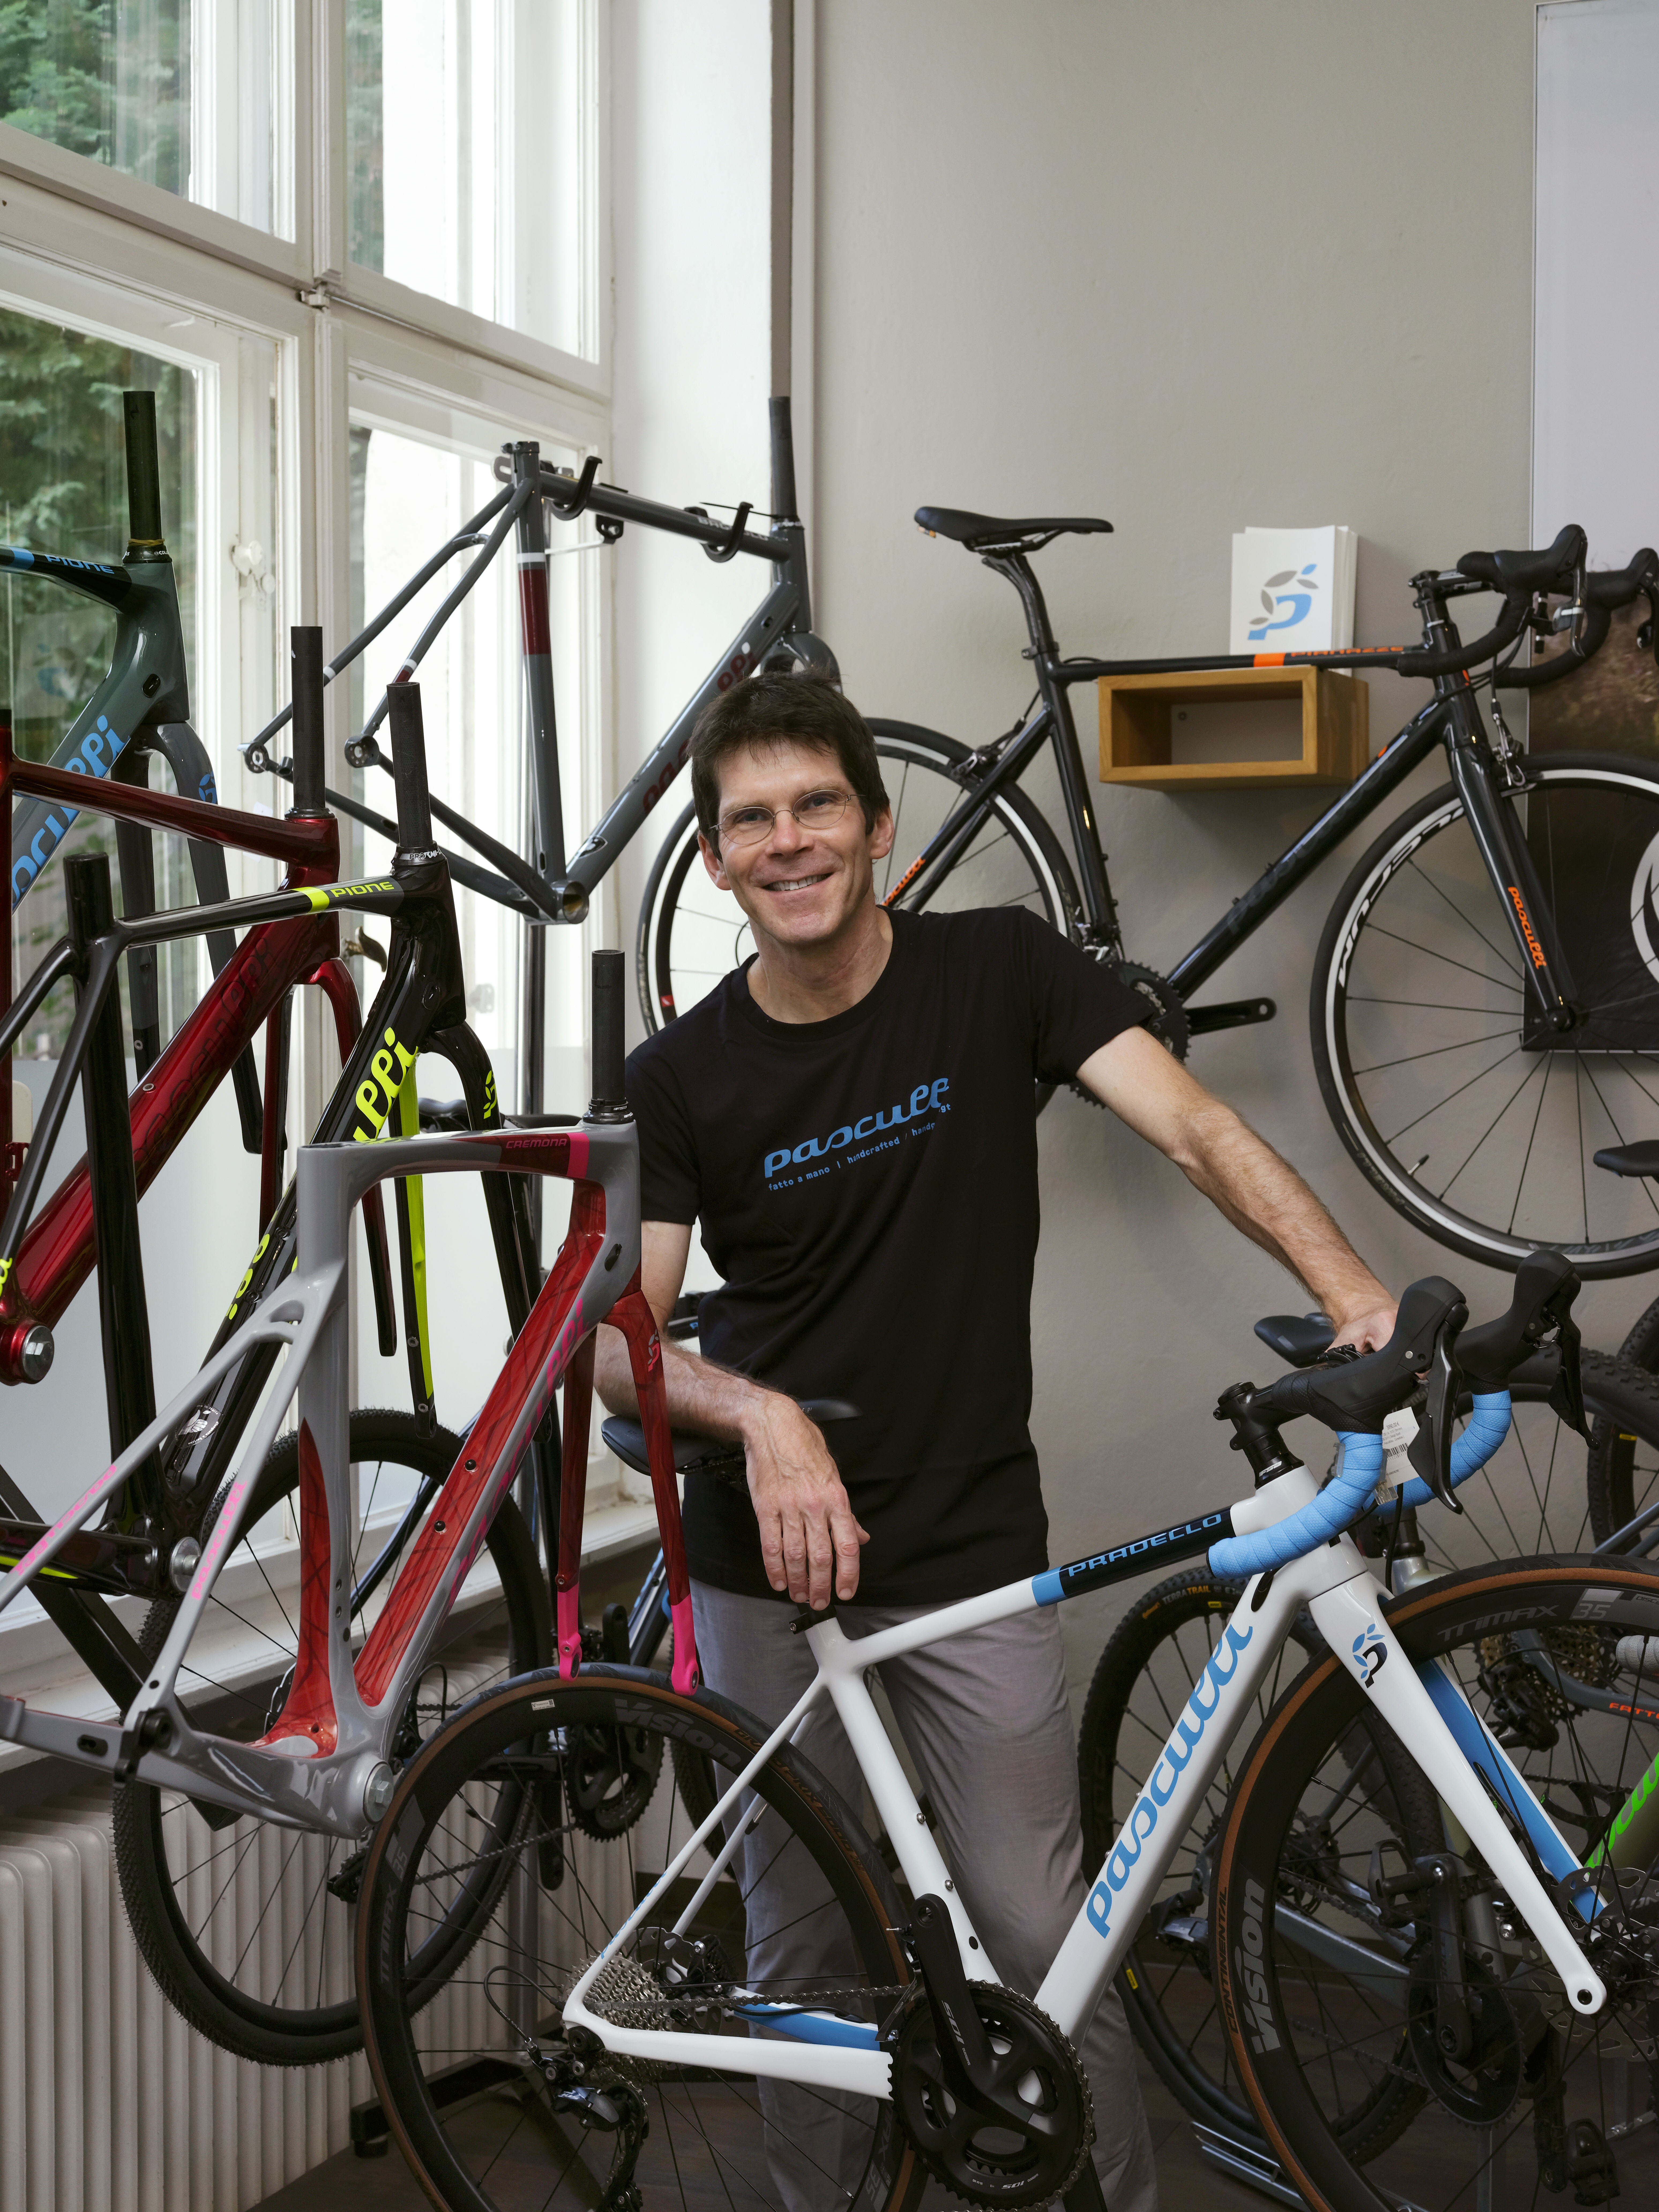 Christoph Hartmann in front of his bicycle